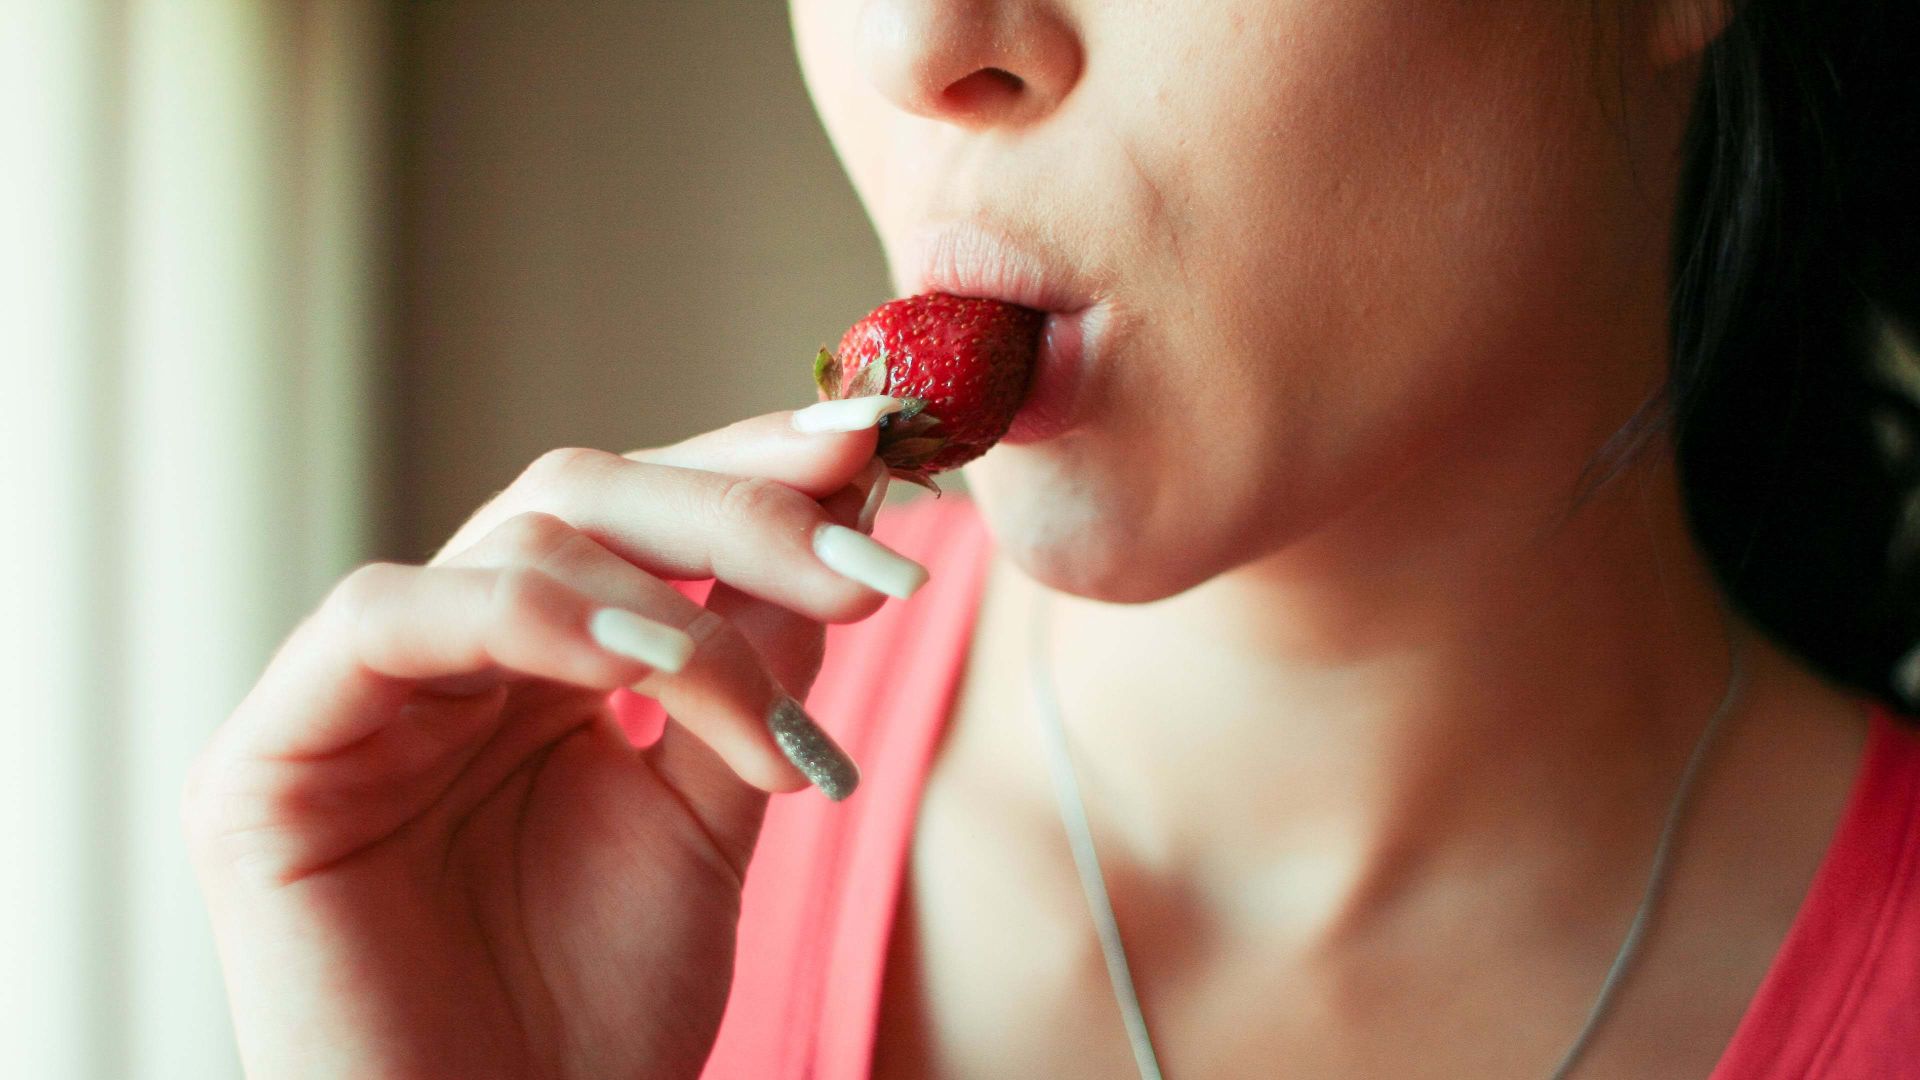 Wallpaper Girl eating a strawberry